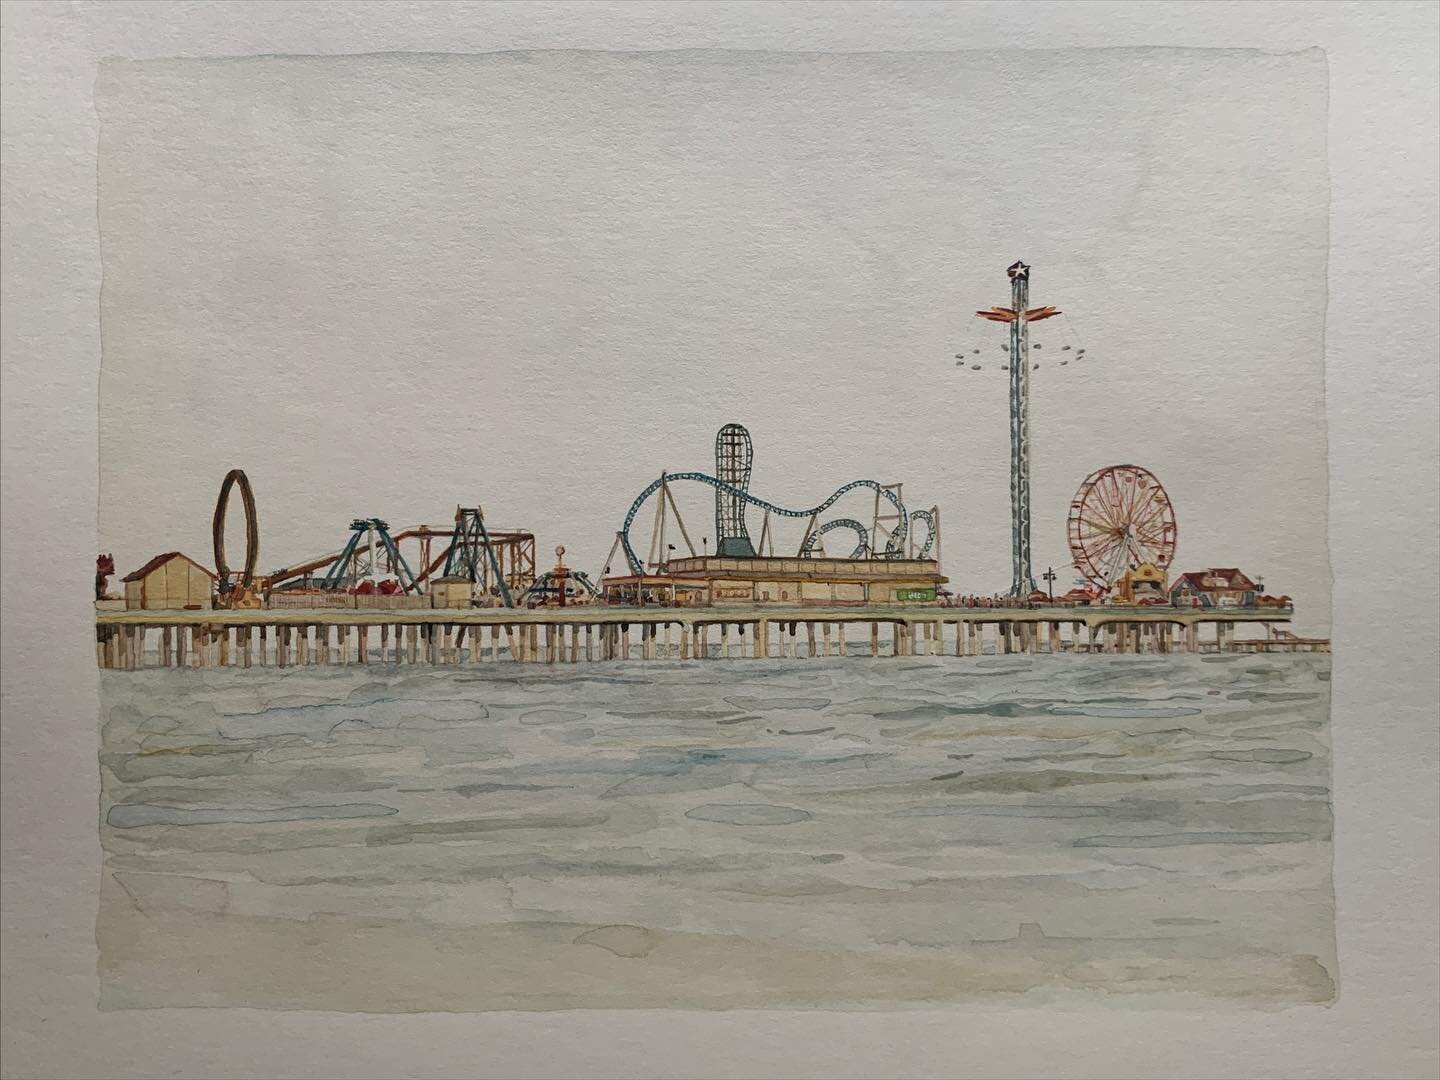 The pier at Galveston, for the excellent @advance_base who is touring the Southern states soon and who writes beautiful songs. 

#art #smallart #artonpaper #smallpainting #contemporaryart #contemporarypainting #contemporarywatercolor #artist #artwork